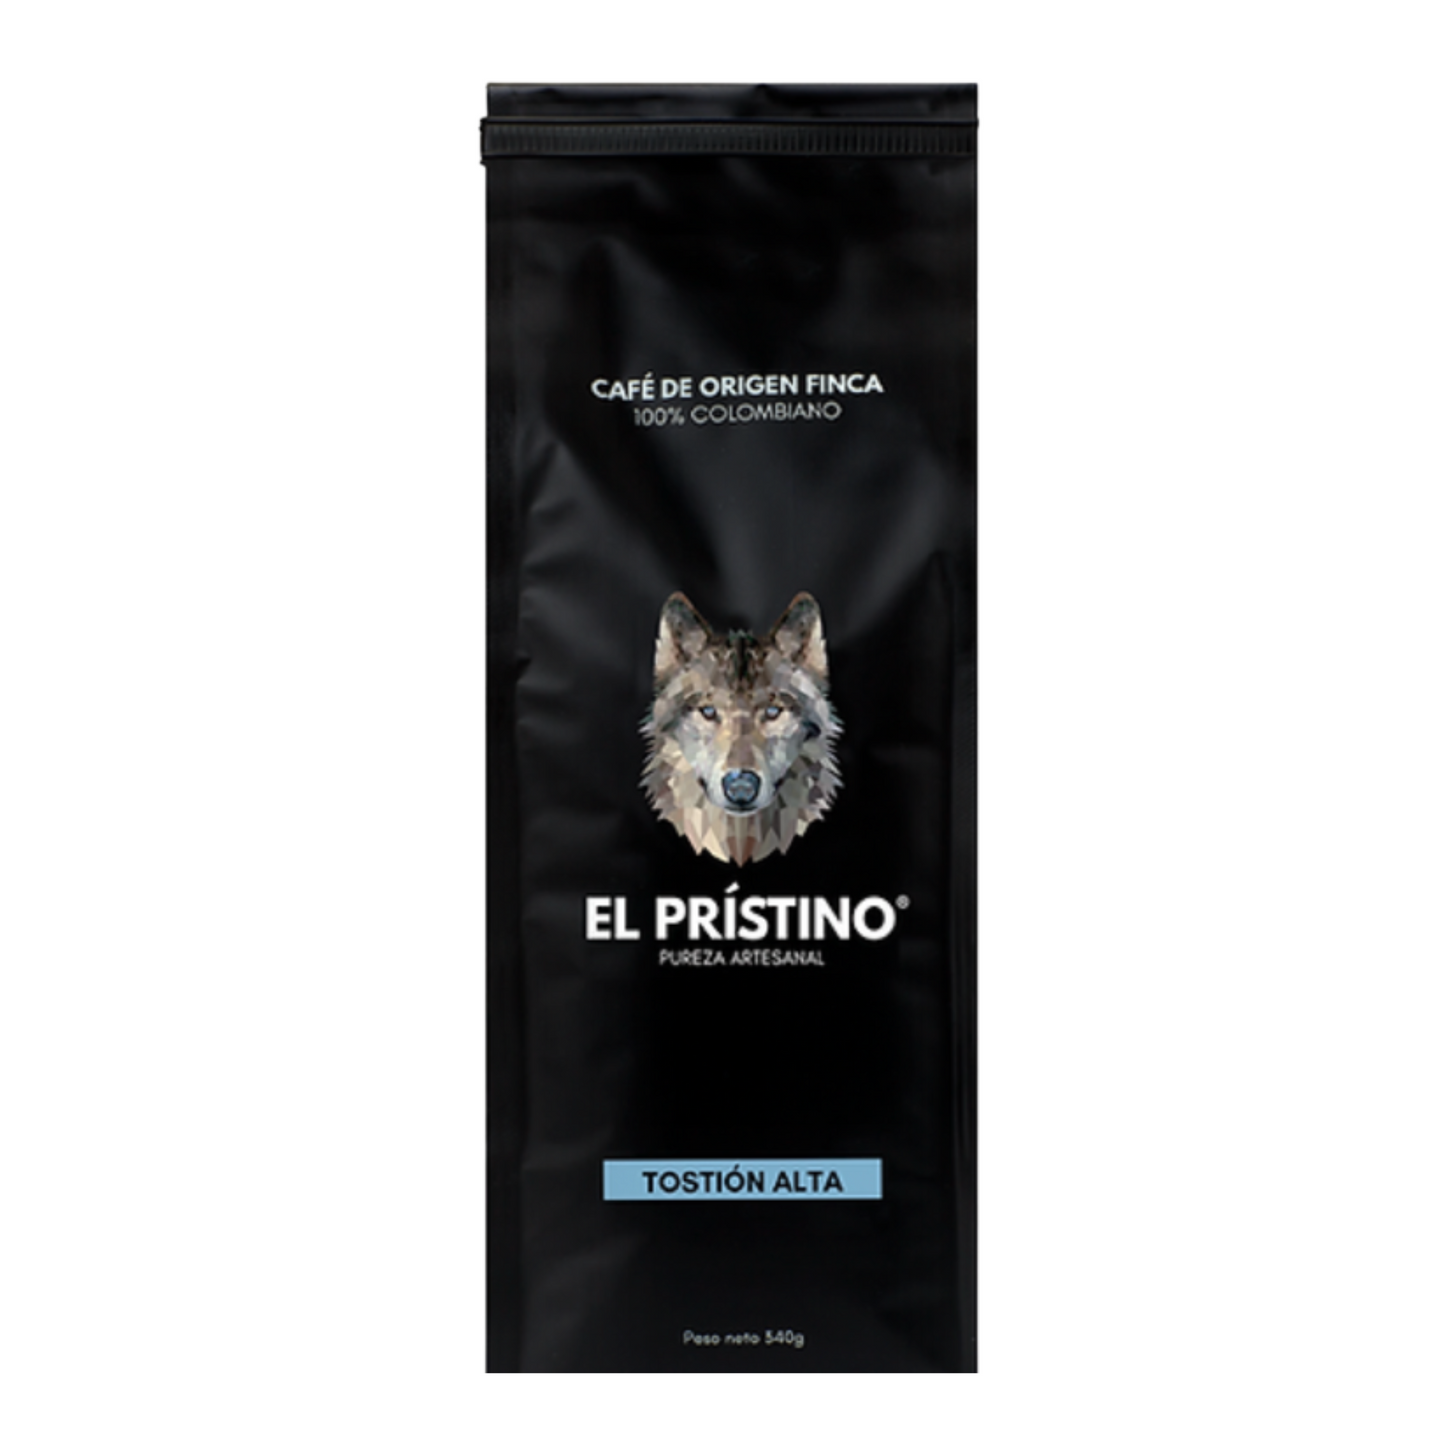 El Prístino Specialty Colombian Coffee - High Roast. Buy it here at Coffee Bean and Birds